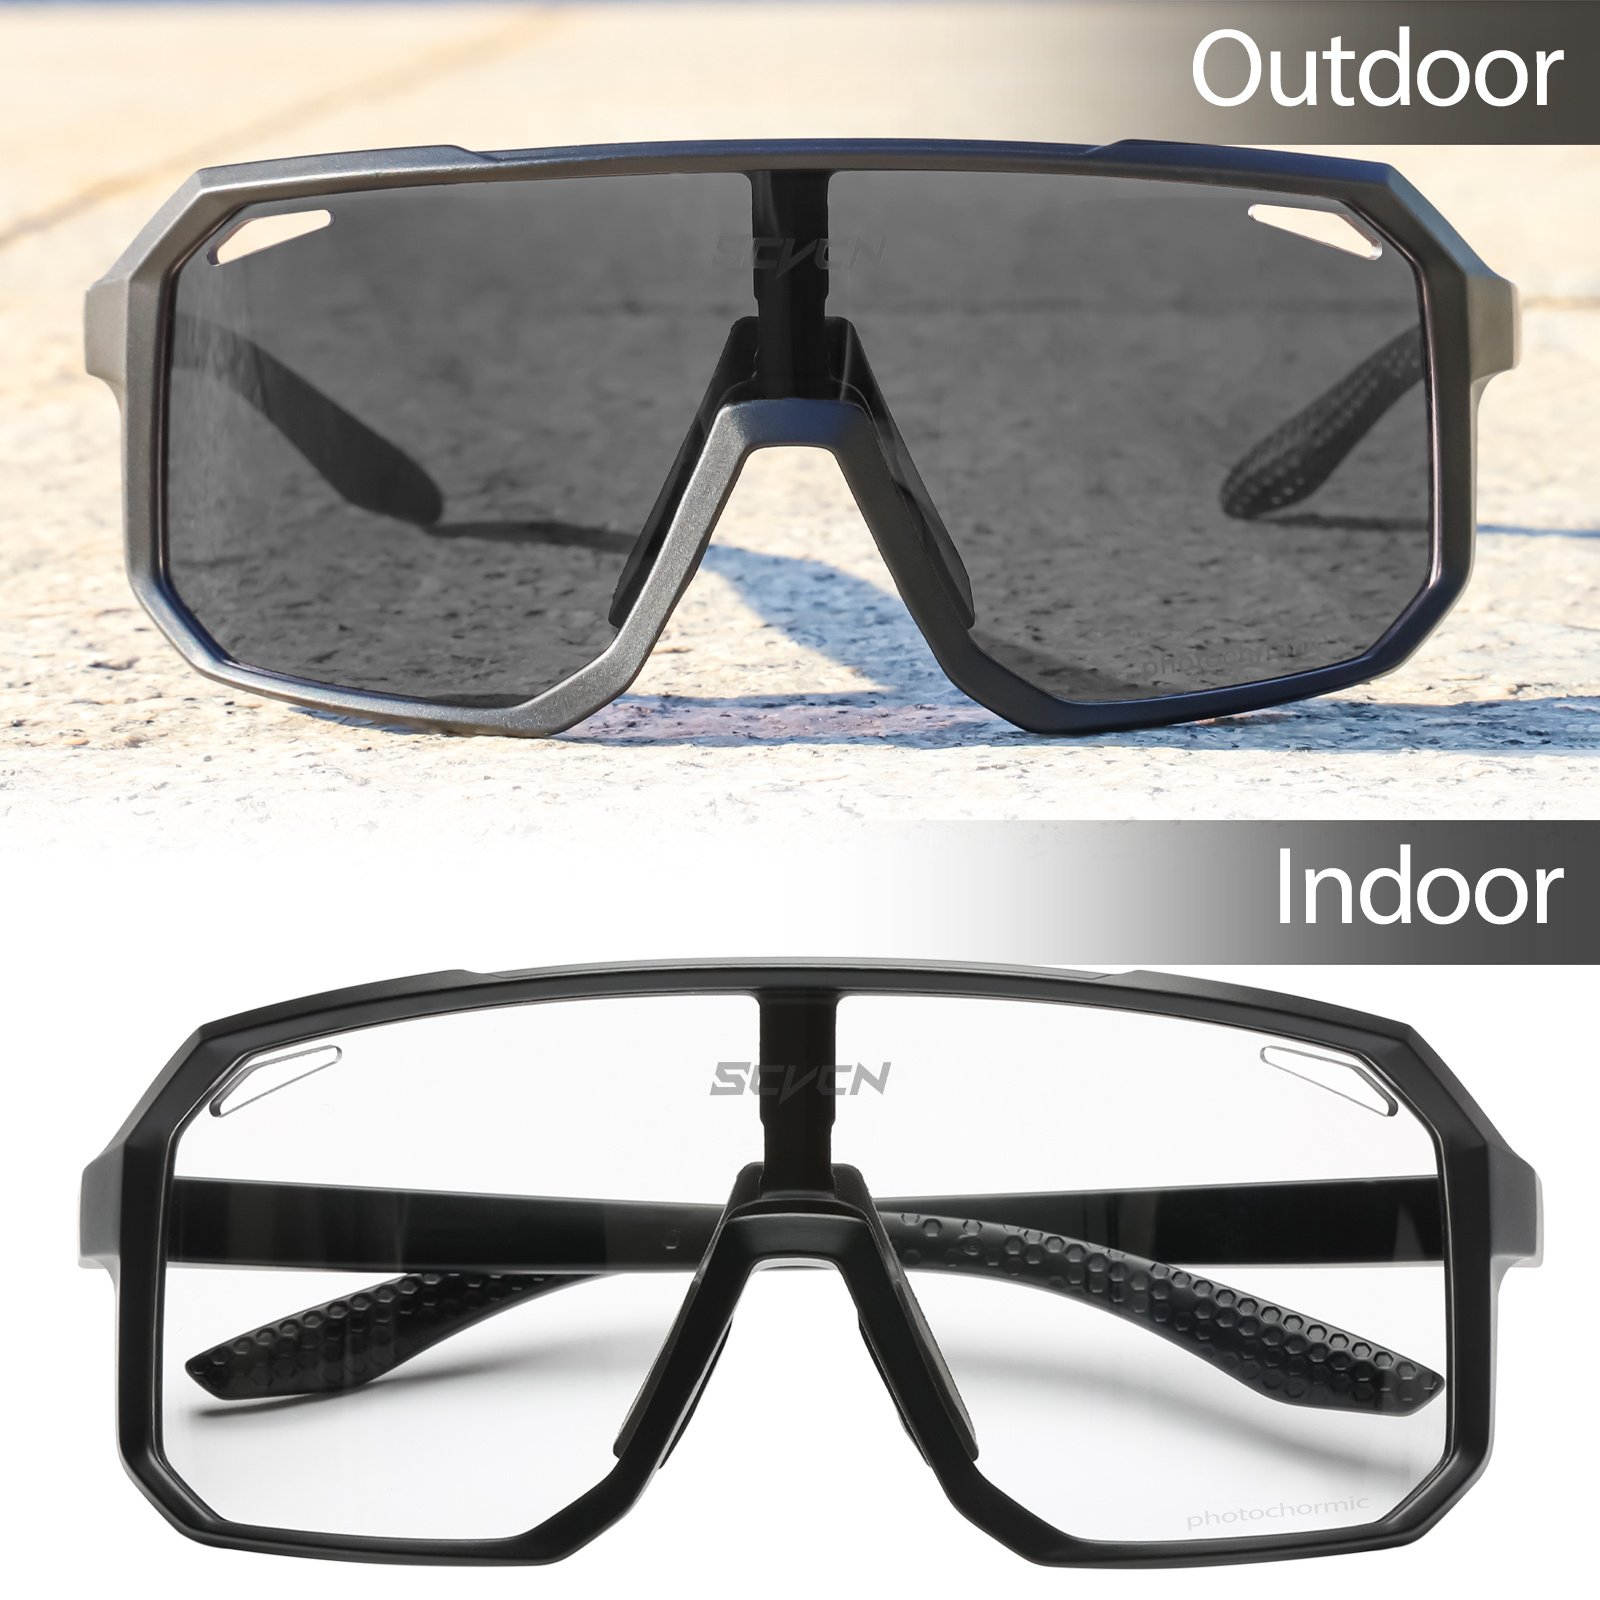 Mens Trendy One Piece Bicycle Bike Sunglasses With Windproof UV Protection  And Night Vision Options From Melody2041, $3.98